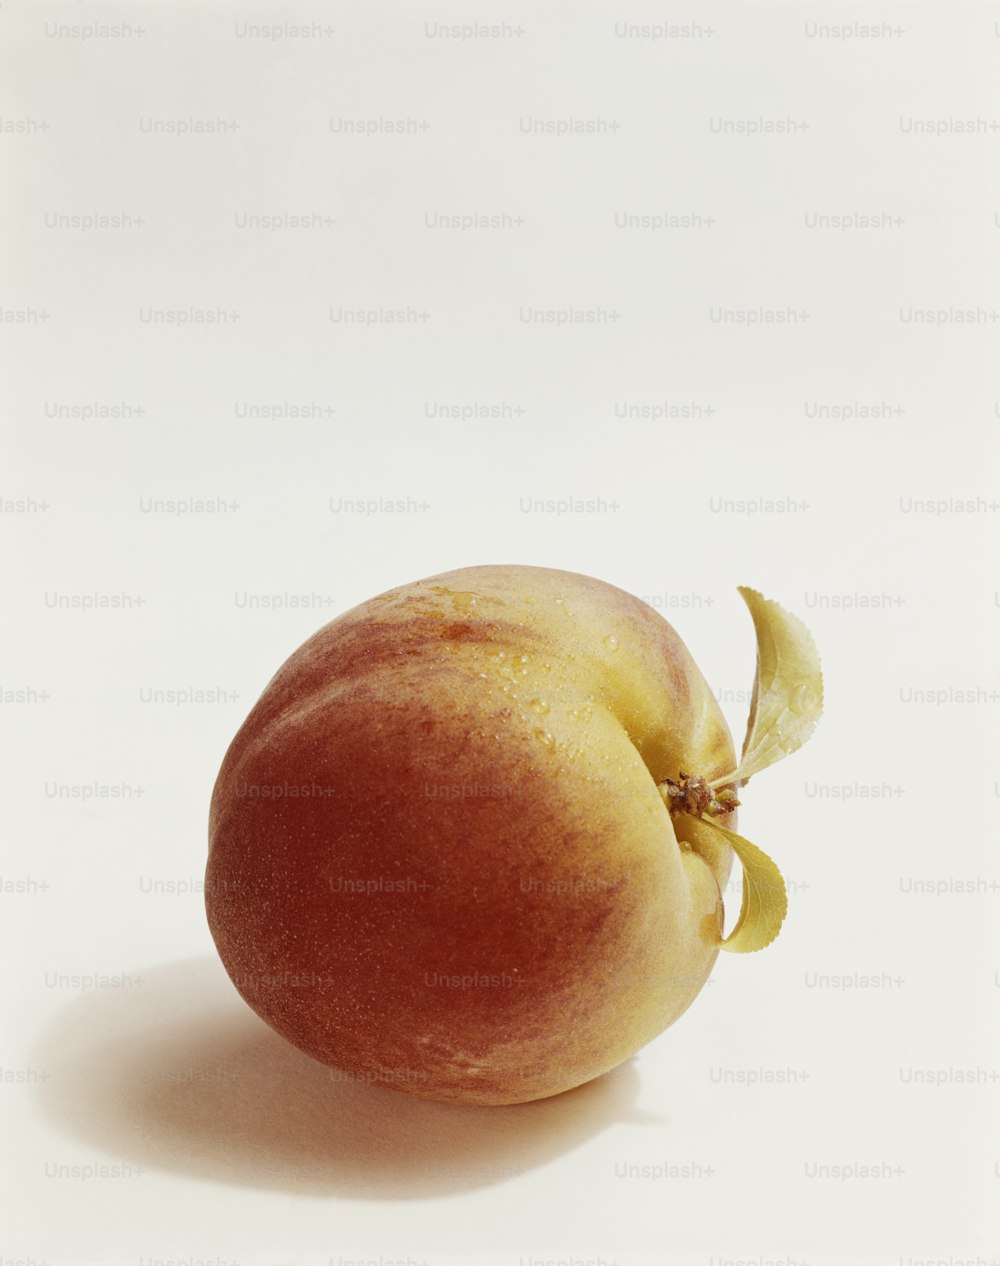 a peach with a bite taken out of it